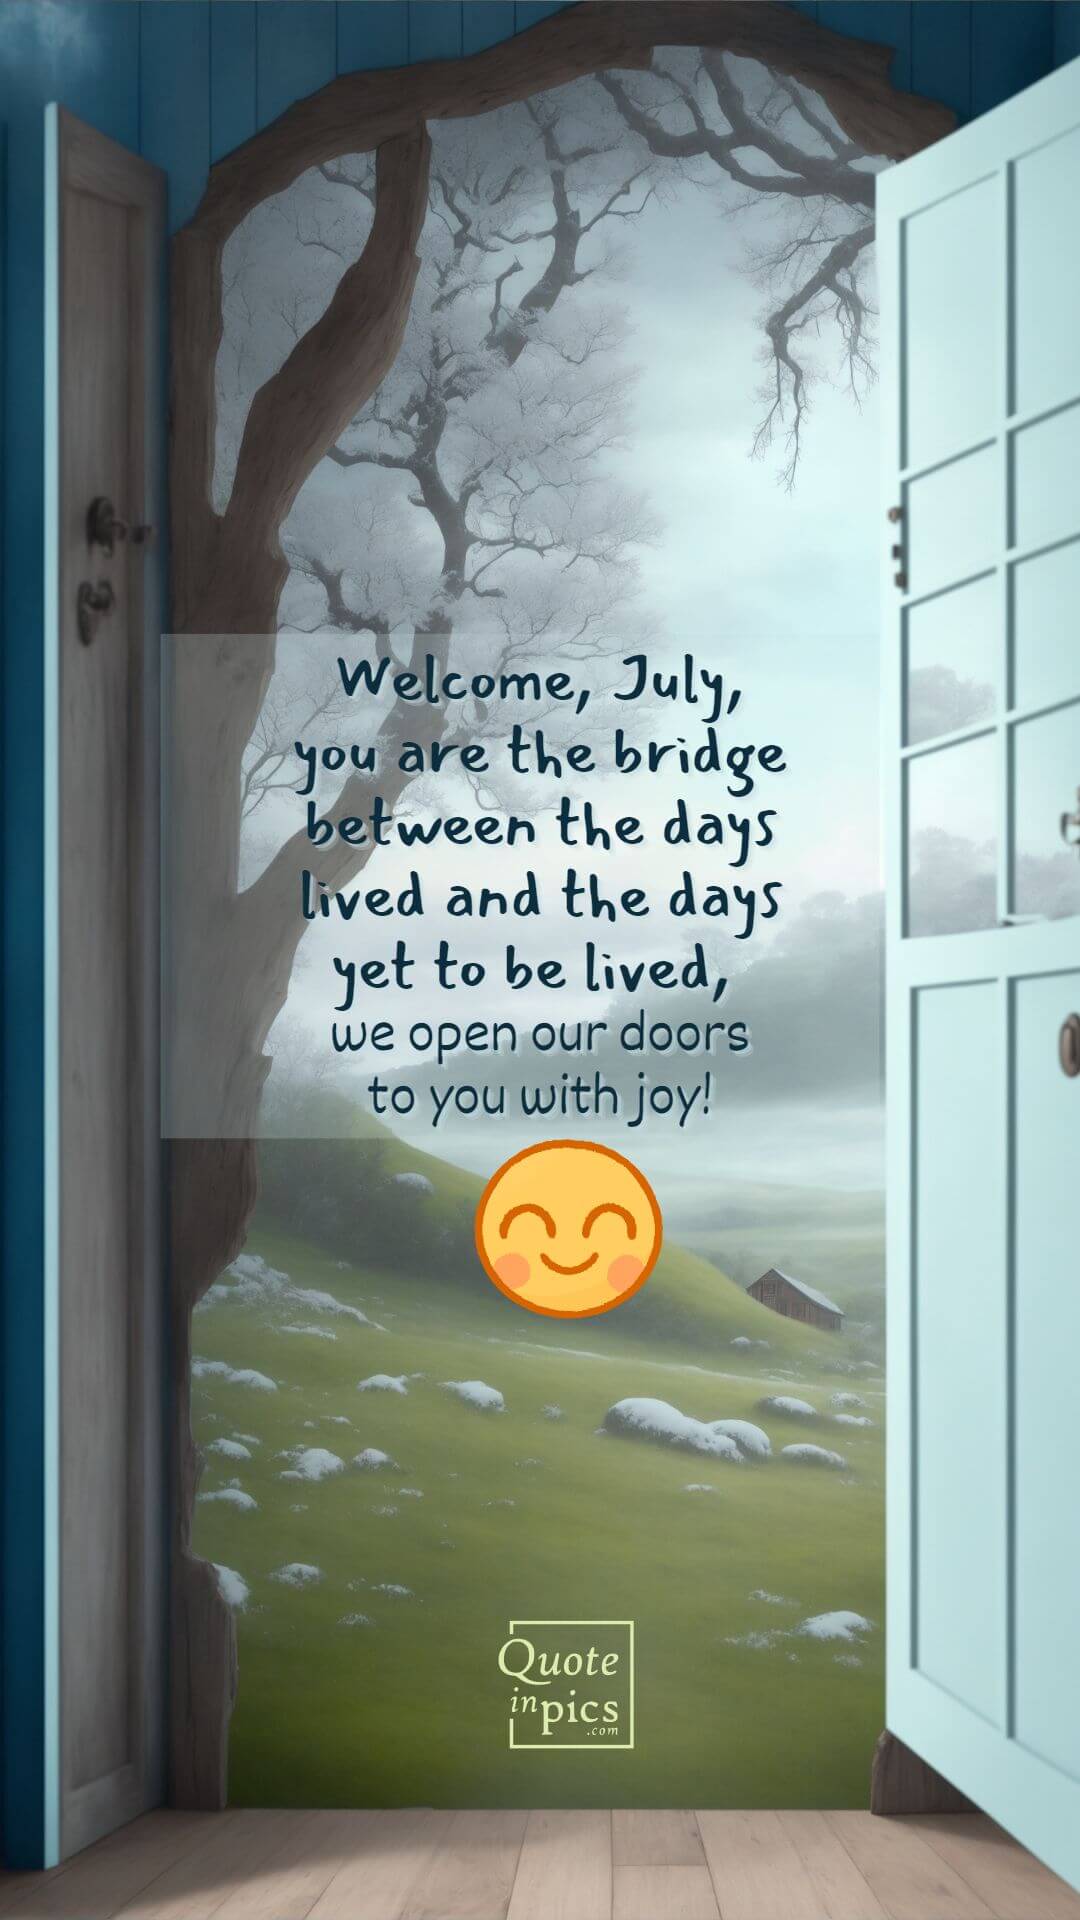 Welcome, July, we open our doors to you with joy!